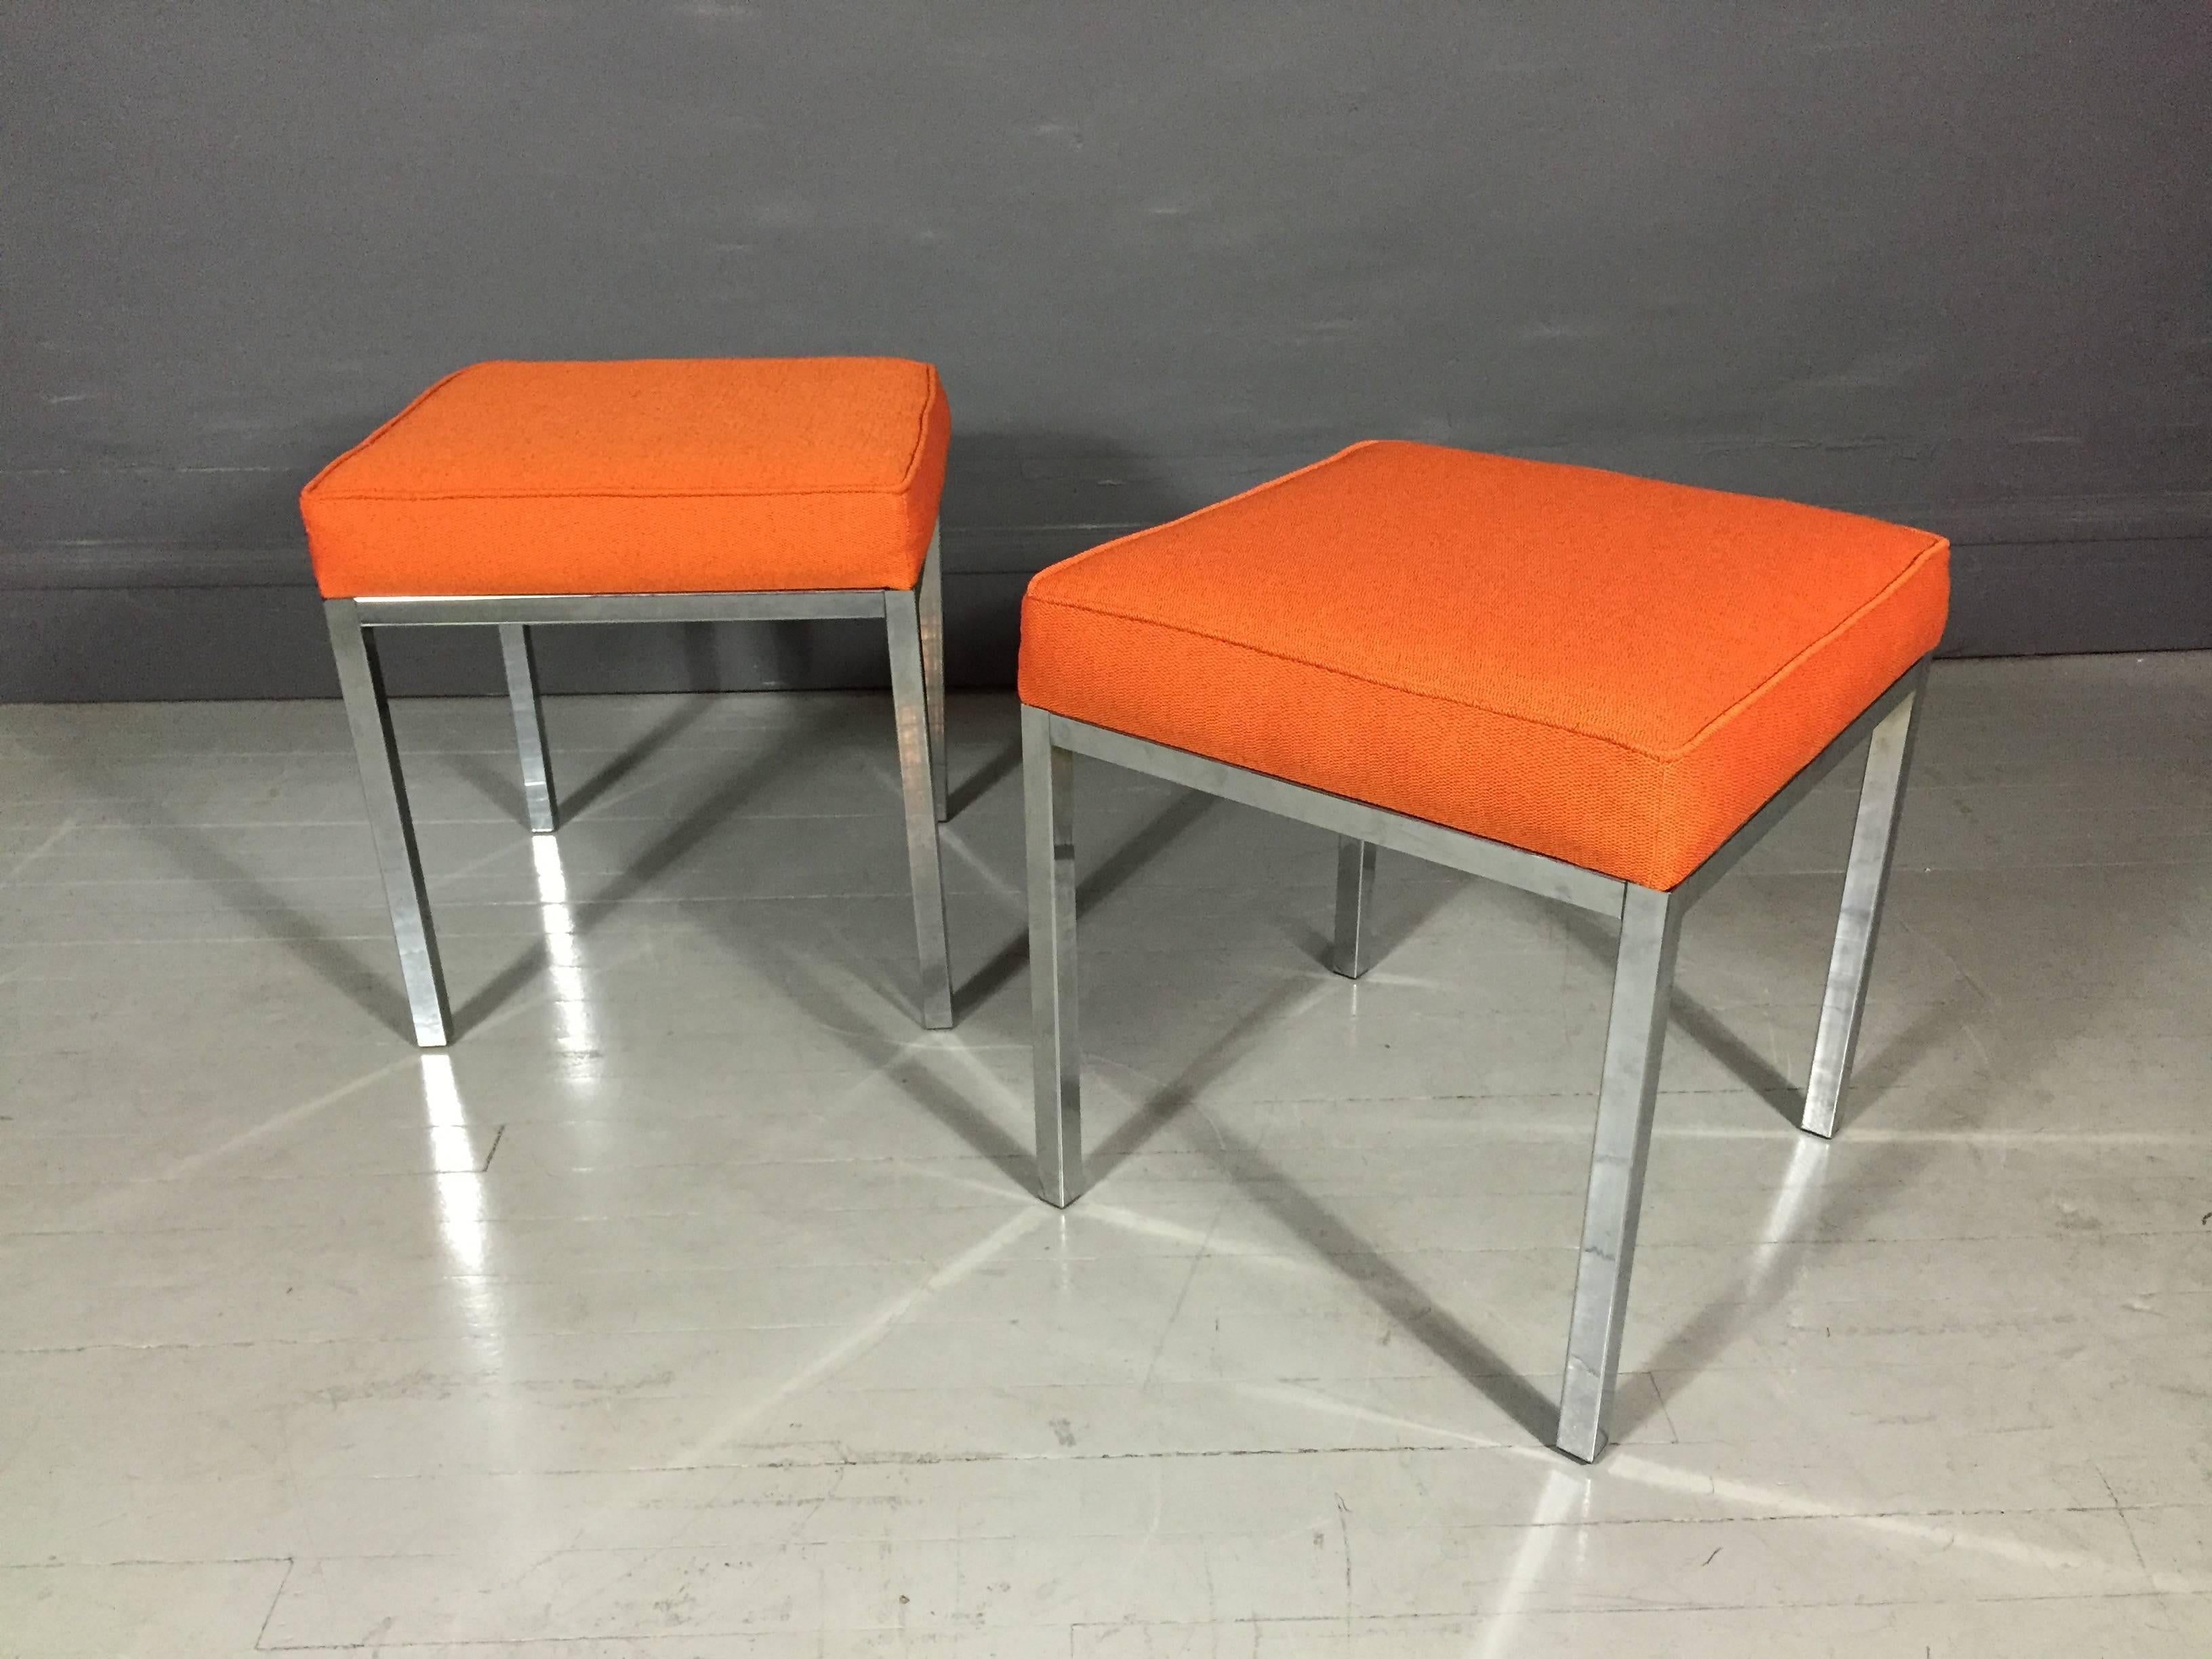 A Classic pair of square benches with chrome legs and newly upholstered in Kvadrat orange wool fabric. All original plastic cap feet, USA, circa 1970s.